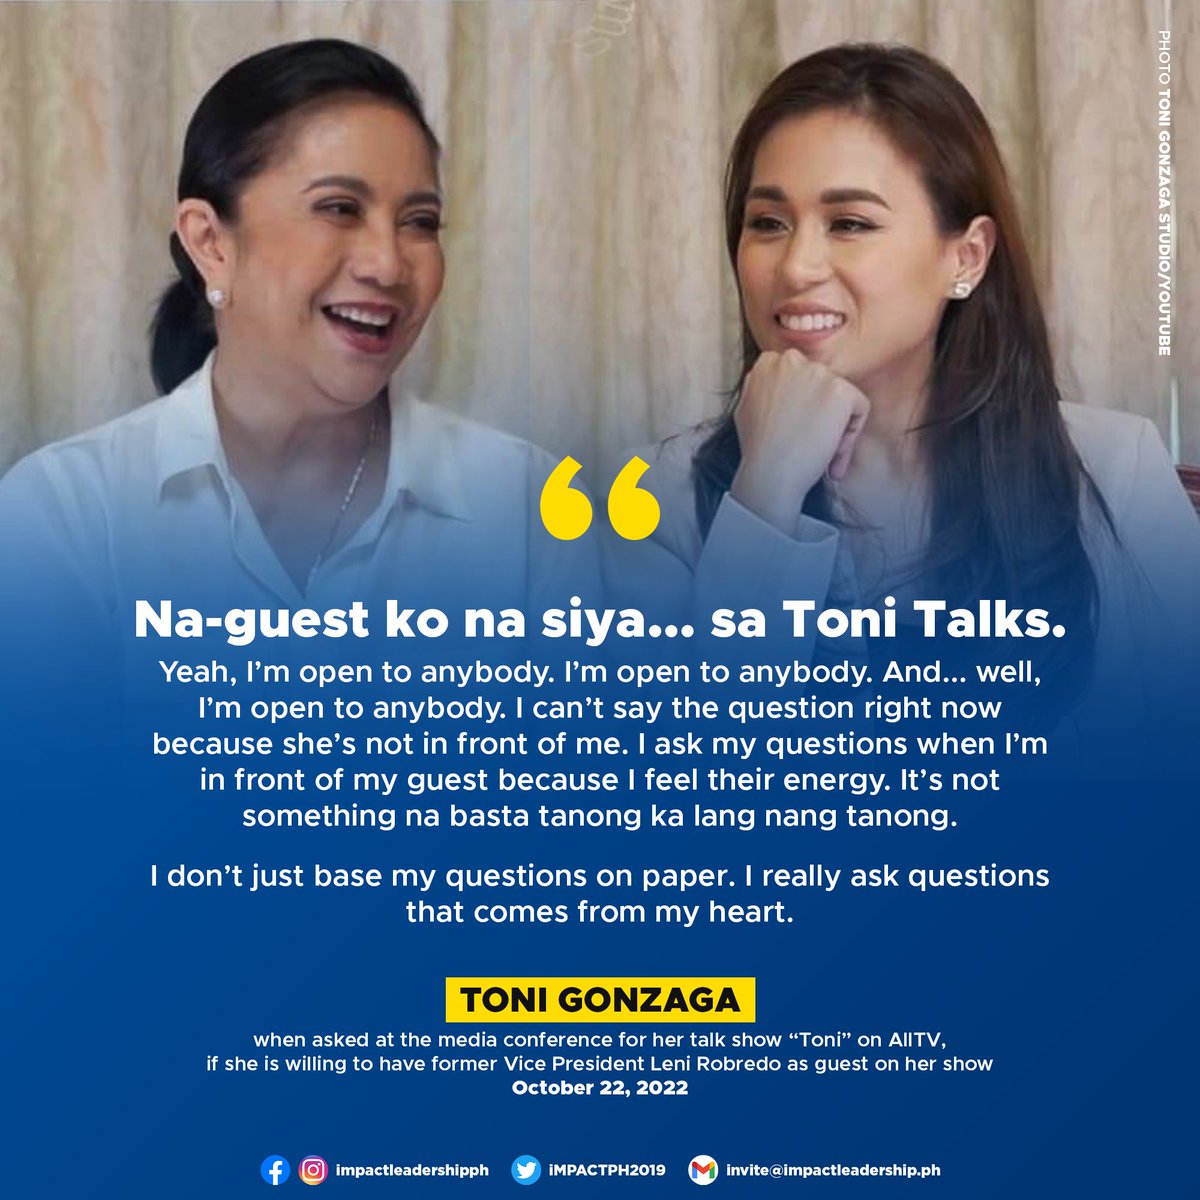 IS TONI WILLING TO HAVE ATTY. LENI AS GUEST ON HER SHOW? Host Toni Gonzaga says she is 'open to anybody' when asked if she is willing to have former Vice President Leni Robredo as guest on her talk show. Gonzaga also said that she already made Robredo a guest on her vlog.